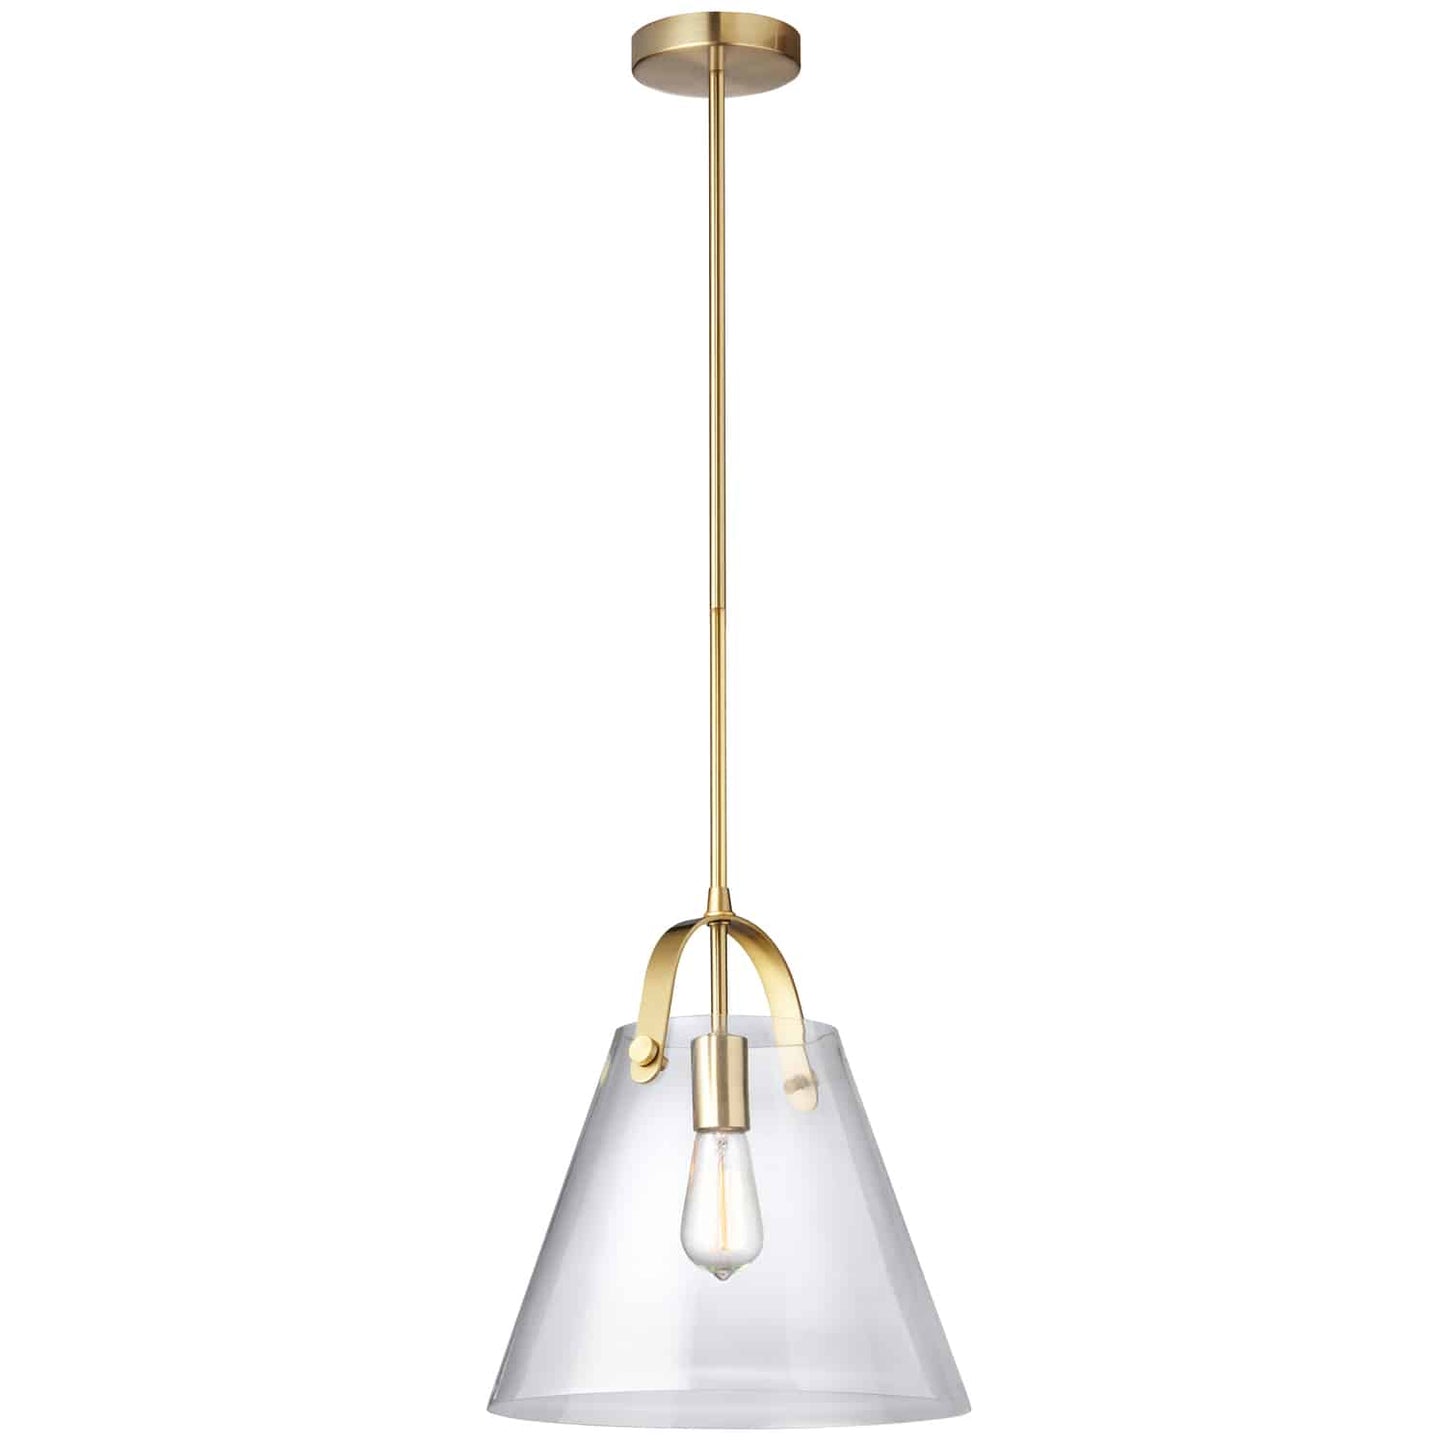 Dainolite 871P-AGB 1 Light Incandescent Pendant Aged Brass Finish with Clear Glass